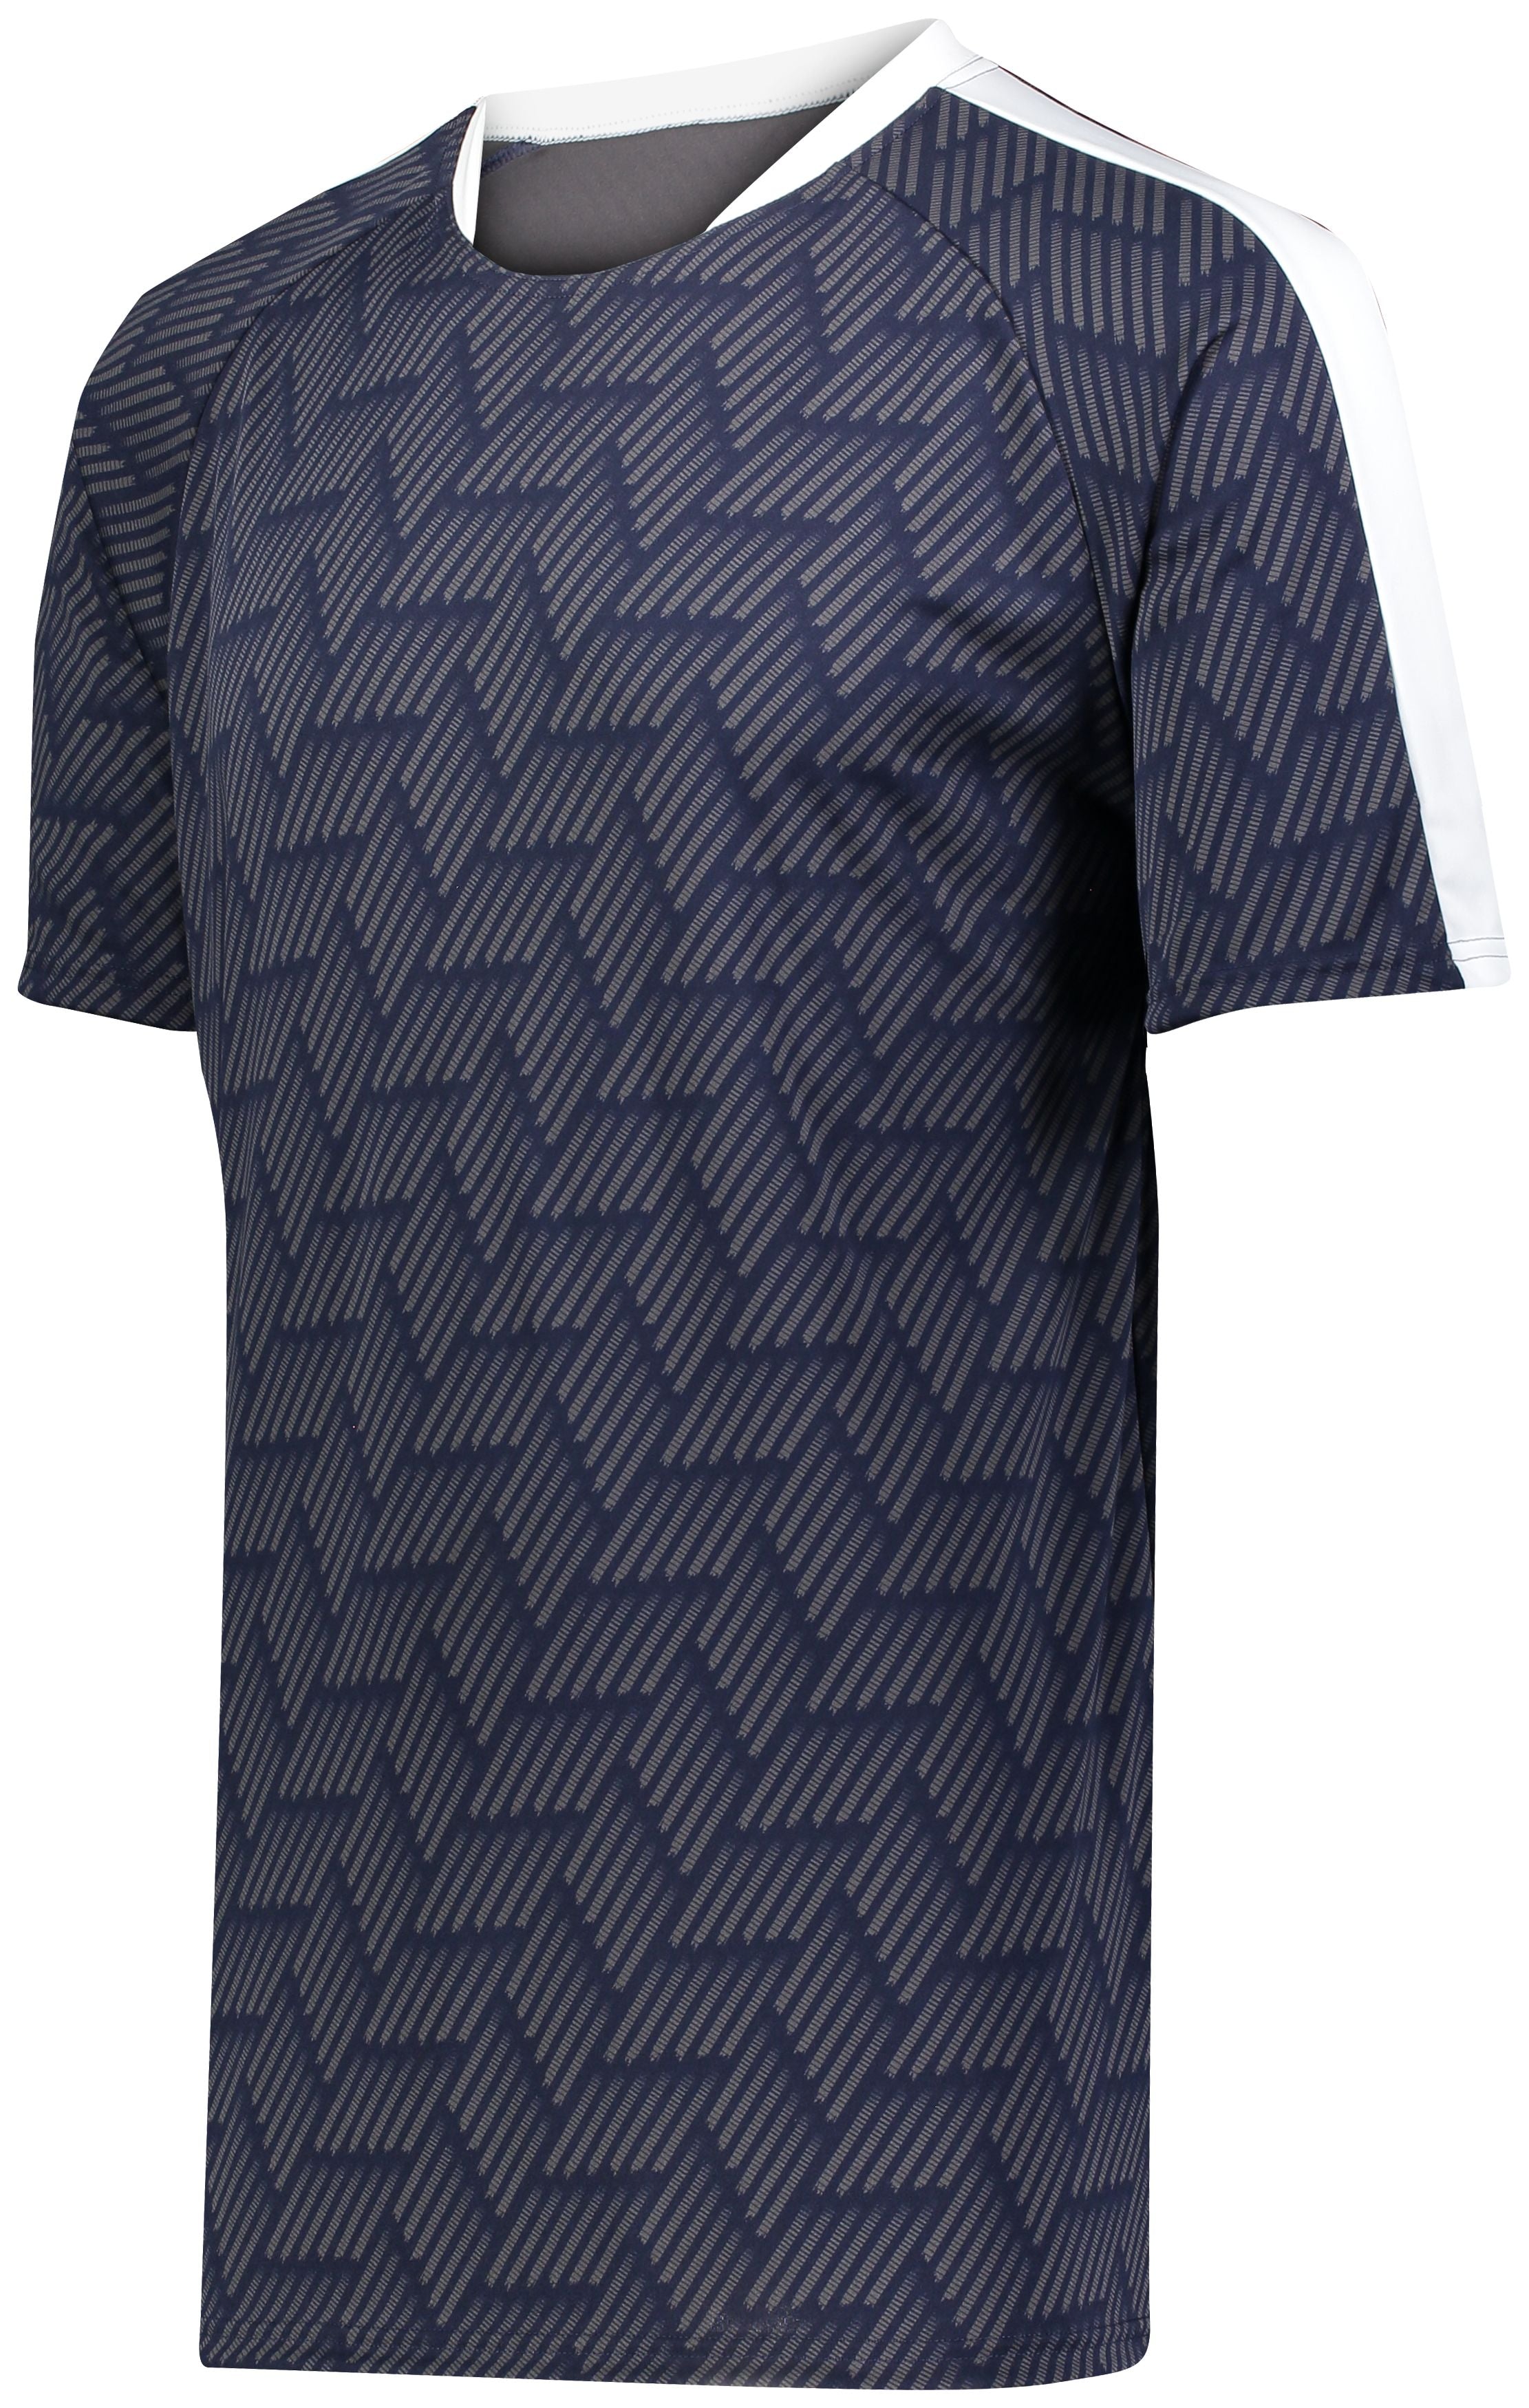 High 5 Hypervolt Jersey in Navy Print/White  -Part of the Adult, Adult-Jersey, High5-Products, Soccer, Shirts, All-Sports-1 product lines at KanaleyCreations.com